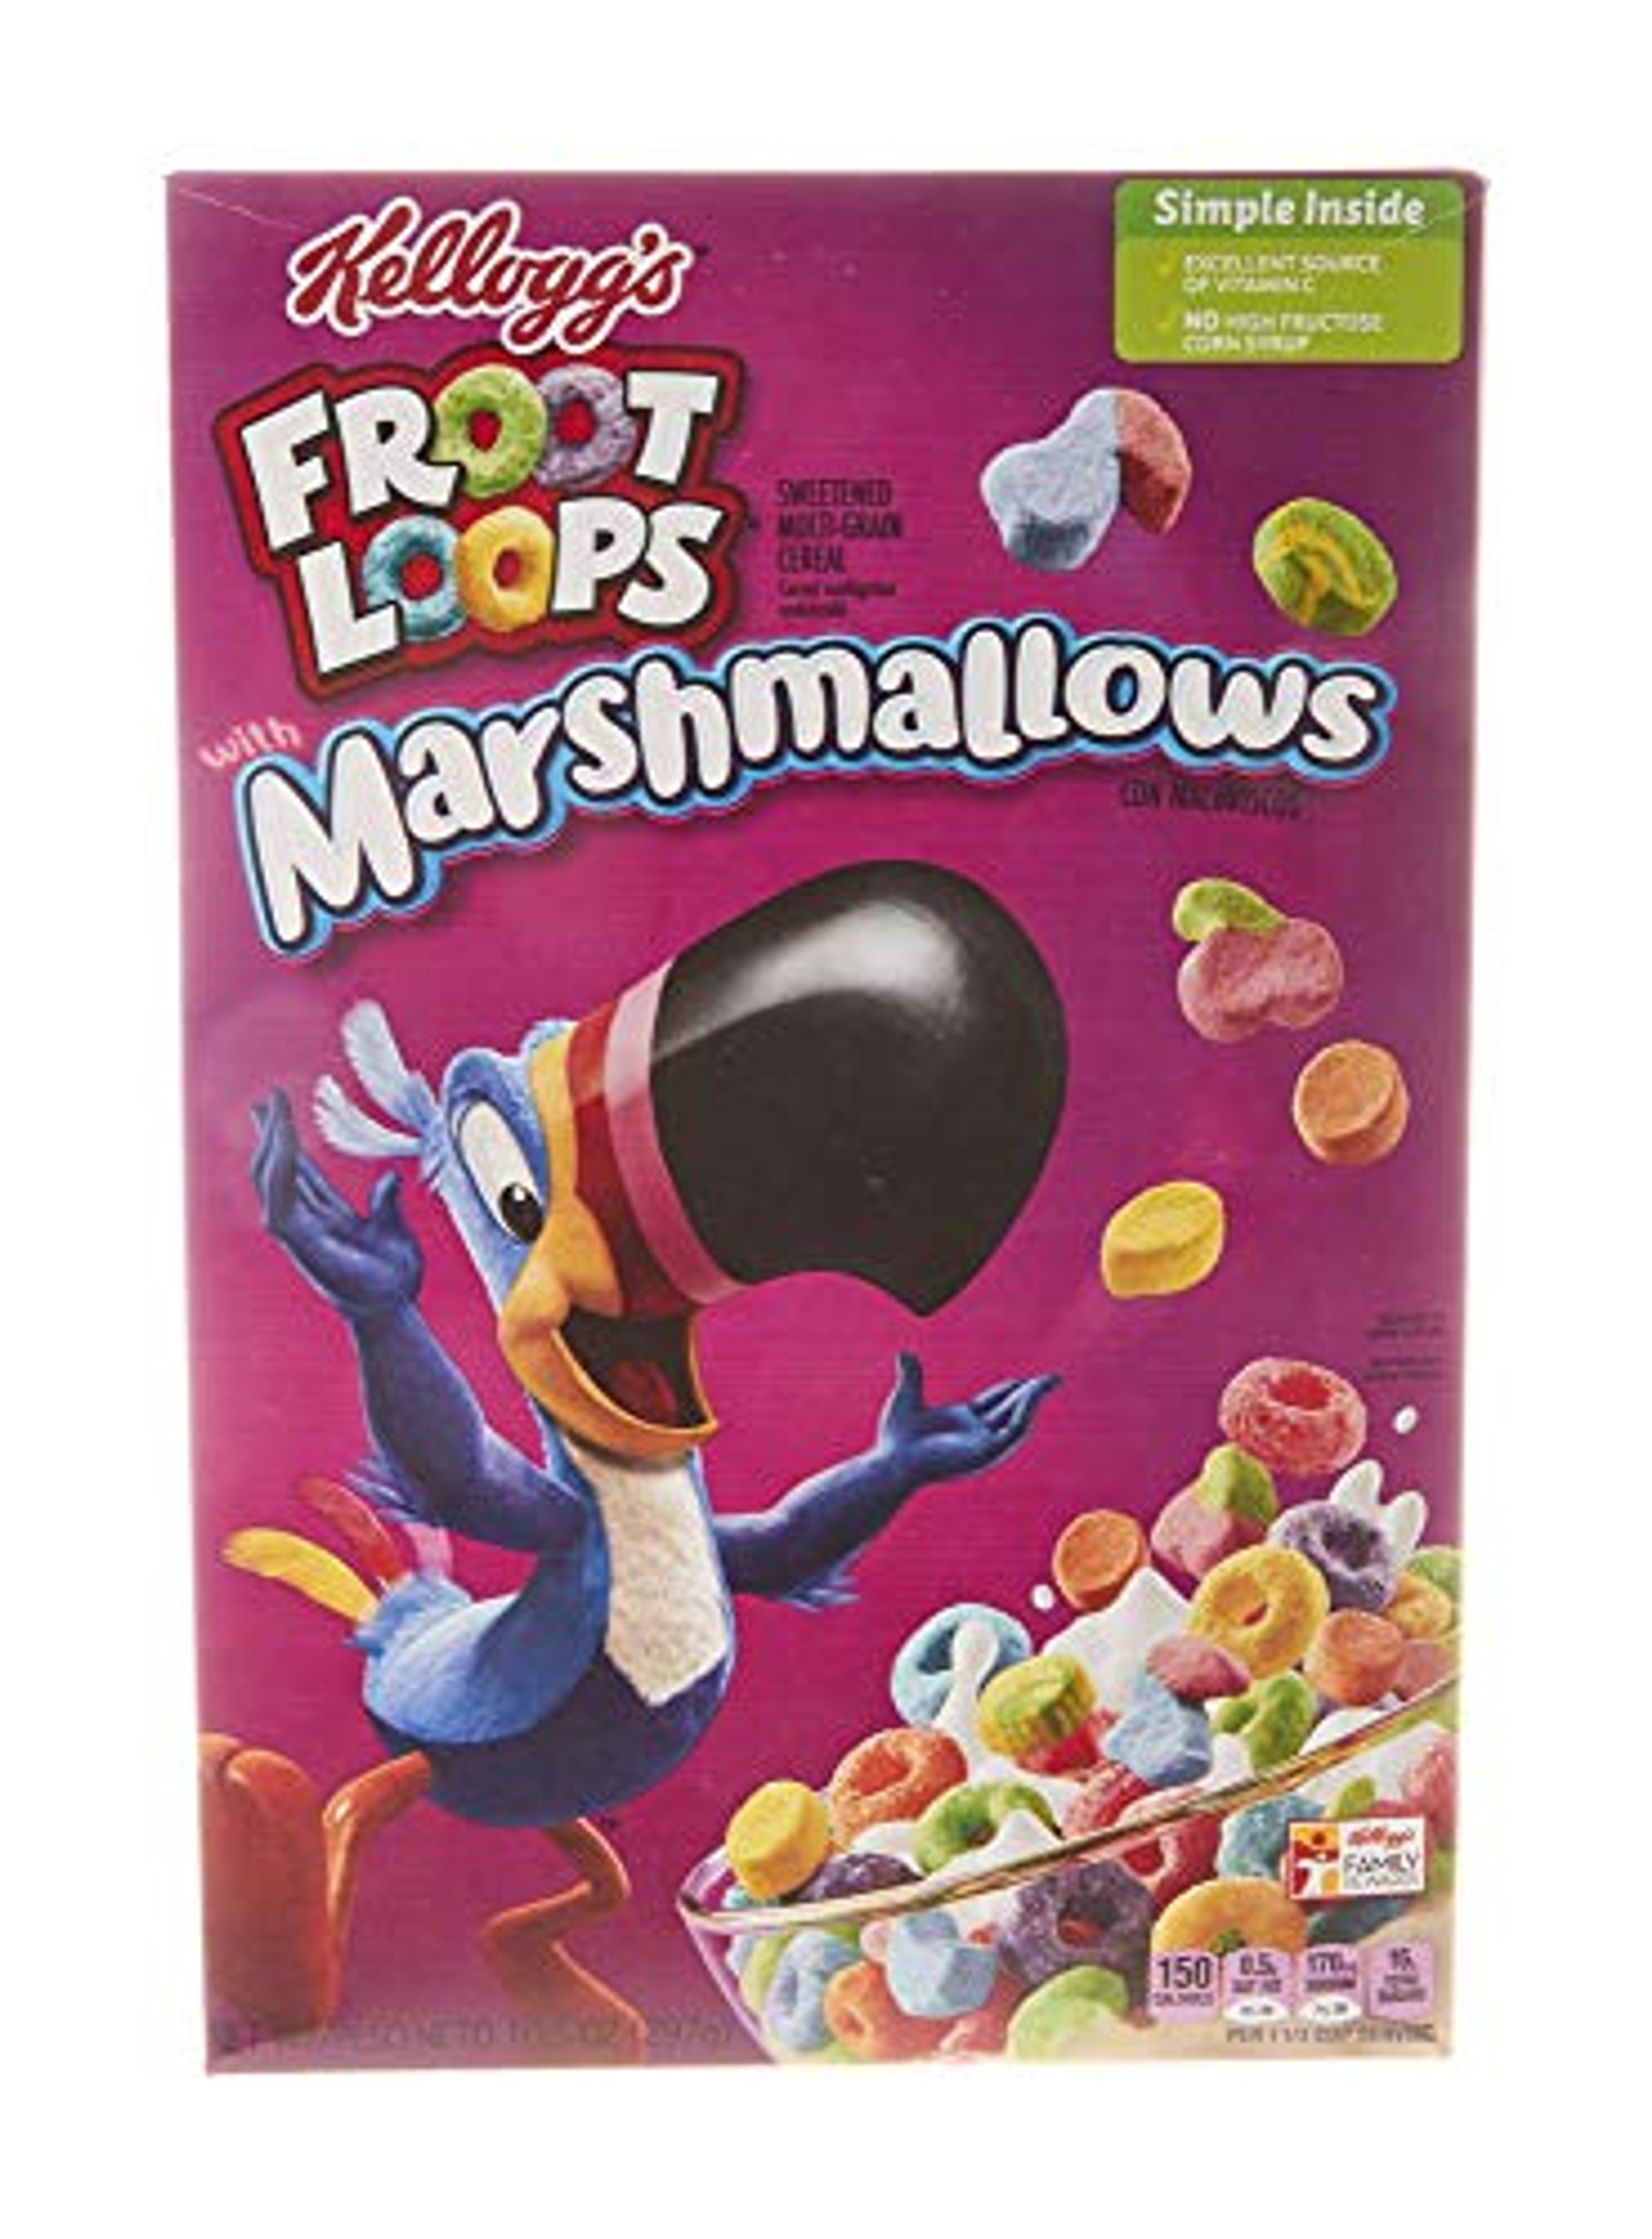 Kellogg s Froot Loops Breakfast Cereal Original with Marshmallows ...